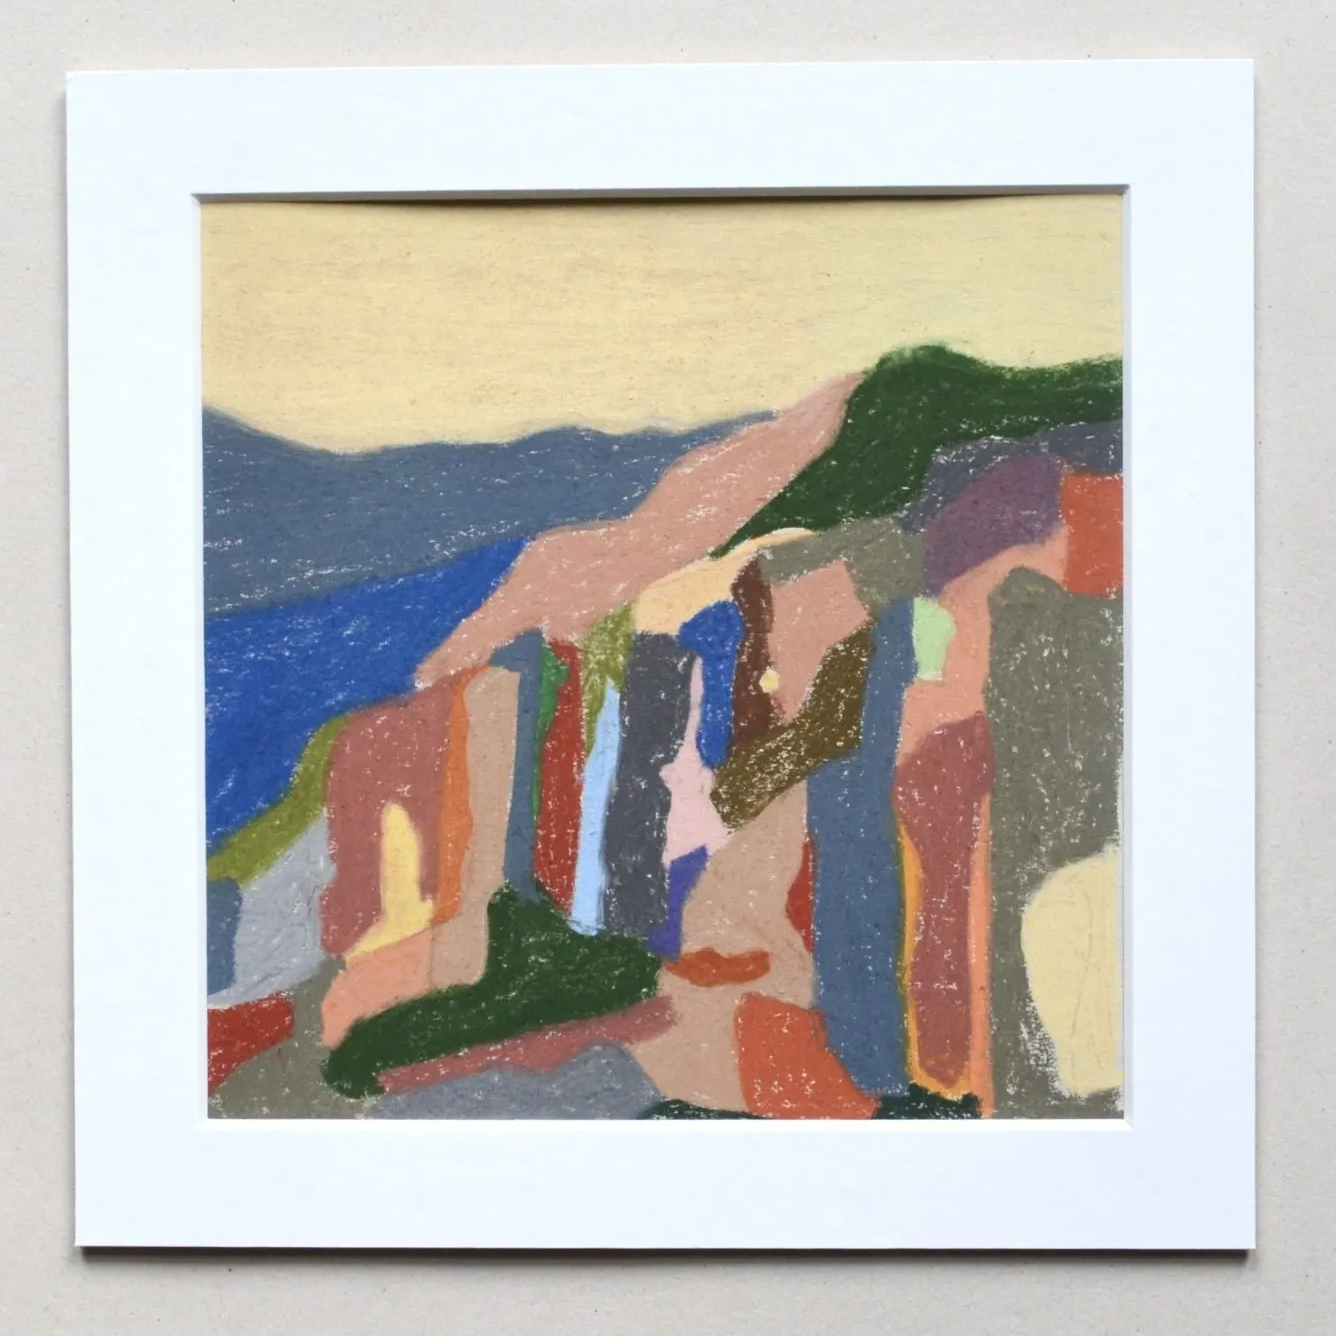 Colourful drawing of hillside with white border on grey background